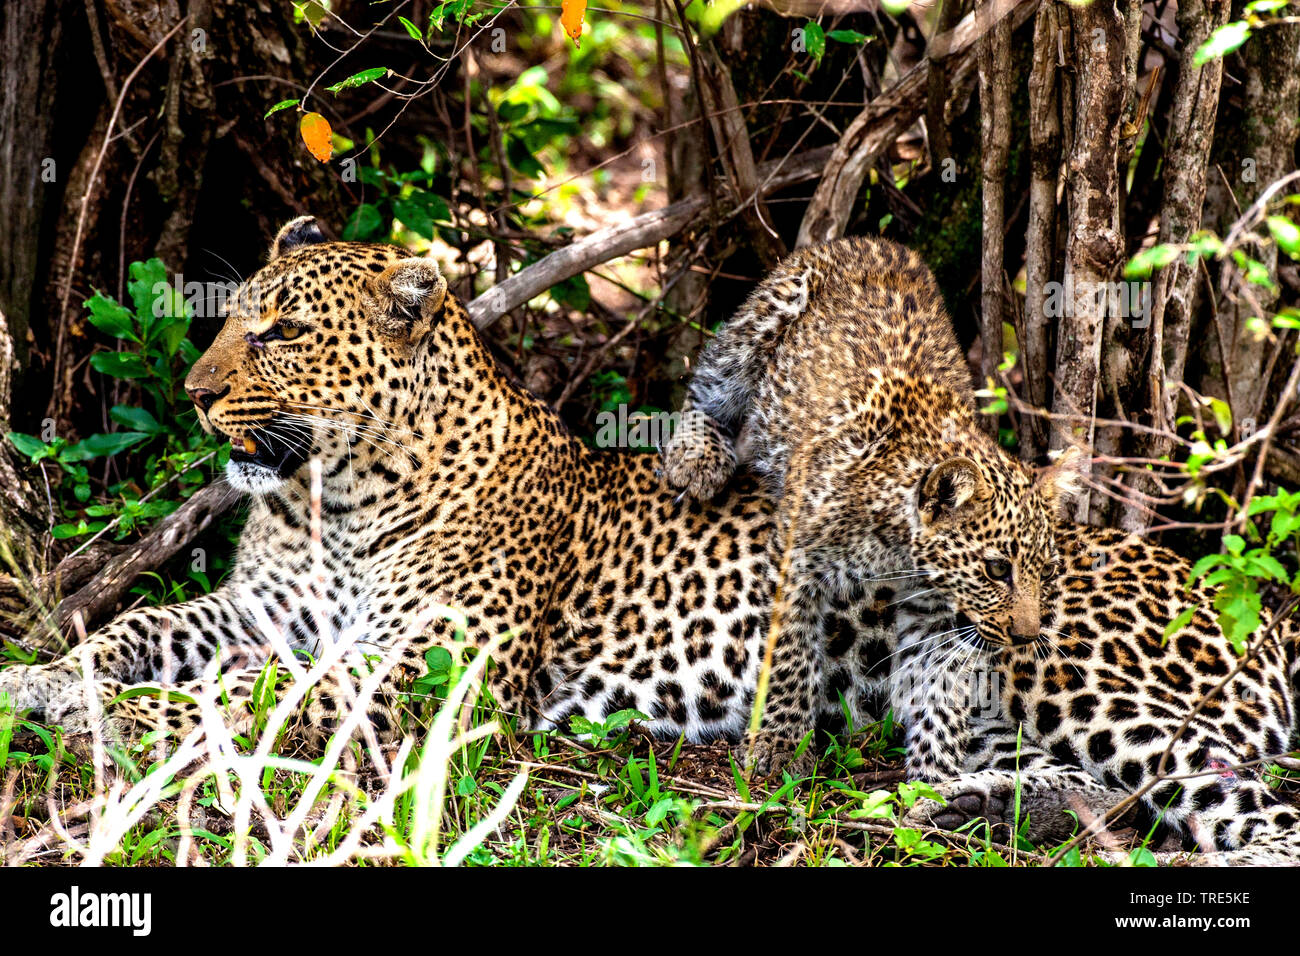 leopard (Panthera pardus), lying with youngster in shrubbery, Kenya, Masai Mara National Park Stock Photo